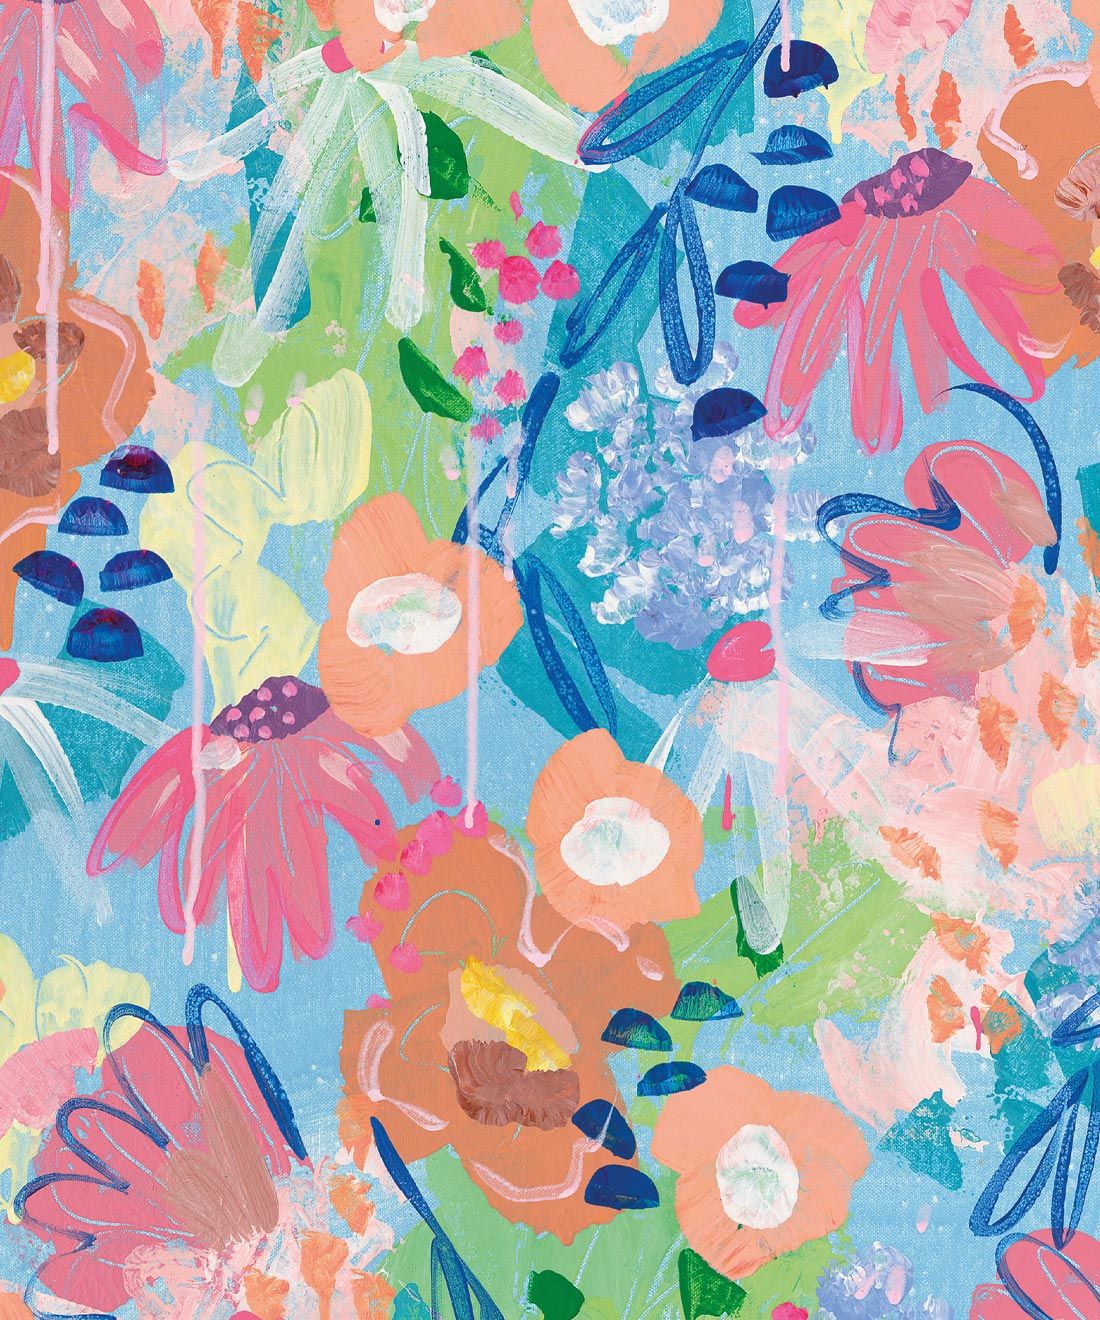 Love Club Wallpaper • Tiff Manuell • Colorful Floral Wallpaper • Swatch